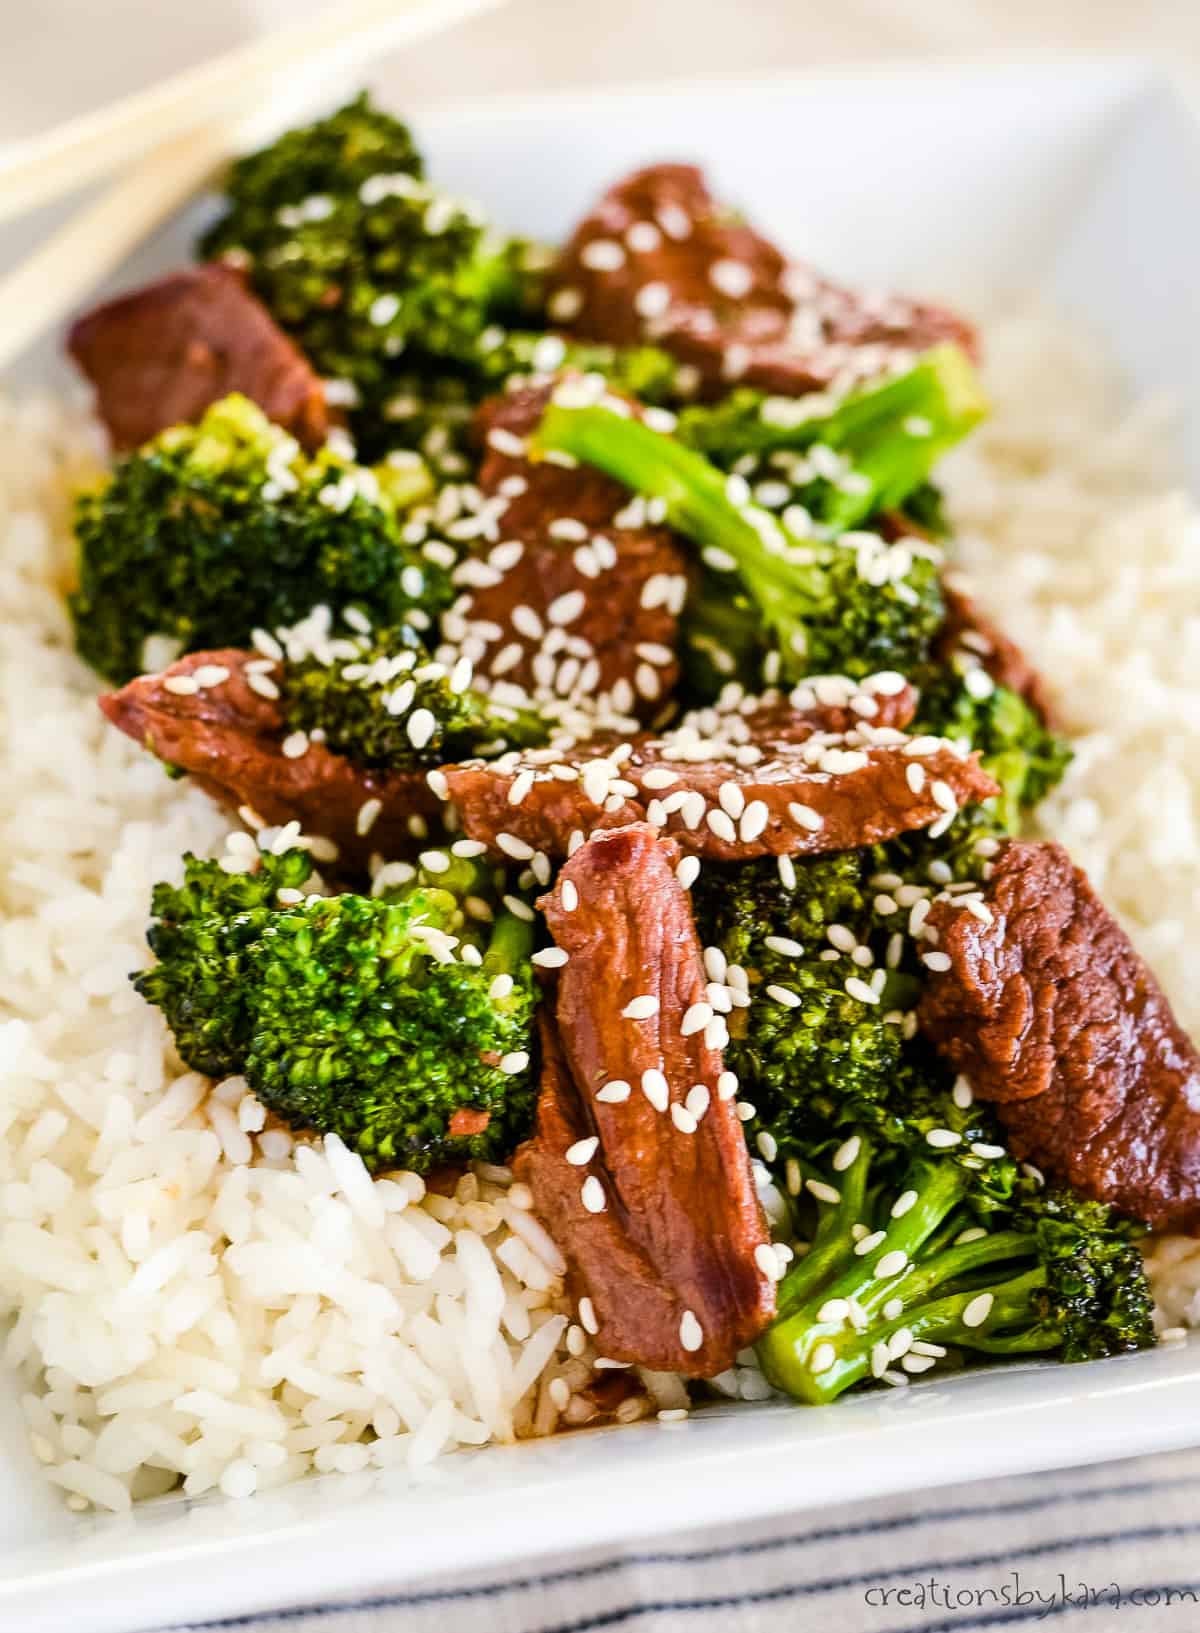 beef with broccoli over rice, garnished with sesame seeds.